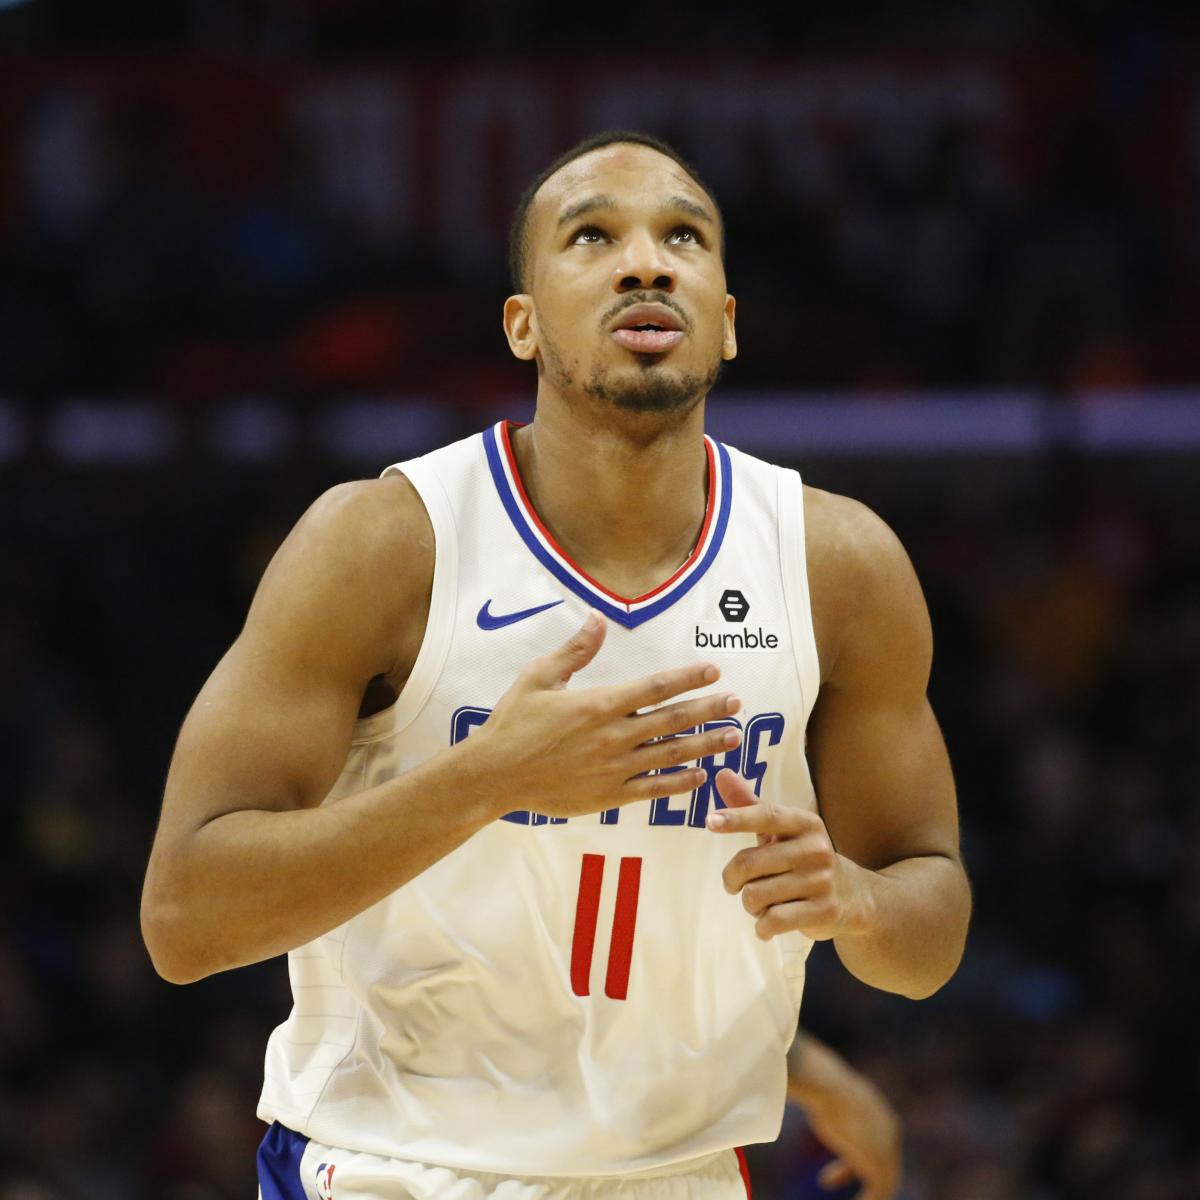 Clippers guard Avery Bradley undergoes abdominal surgery, out 6-8